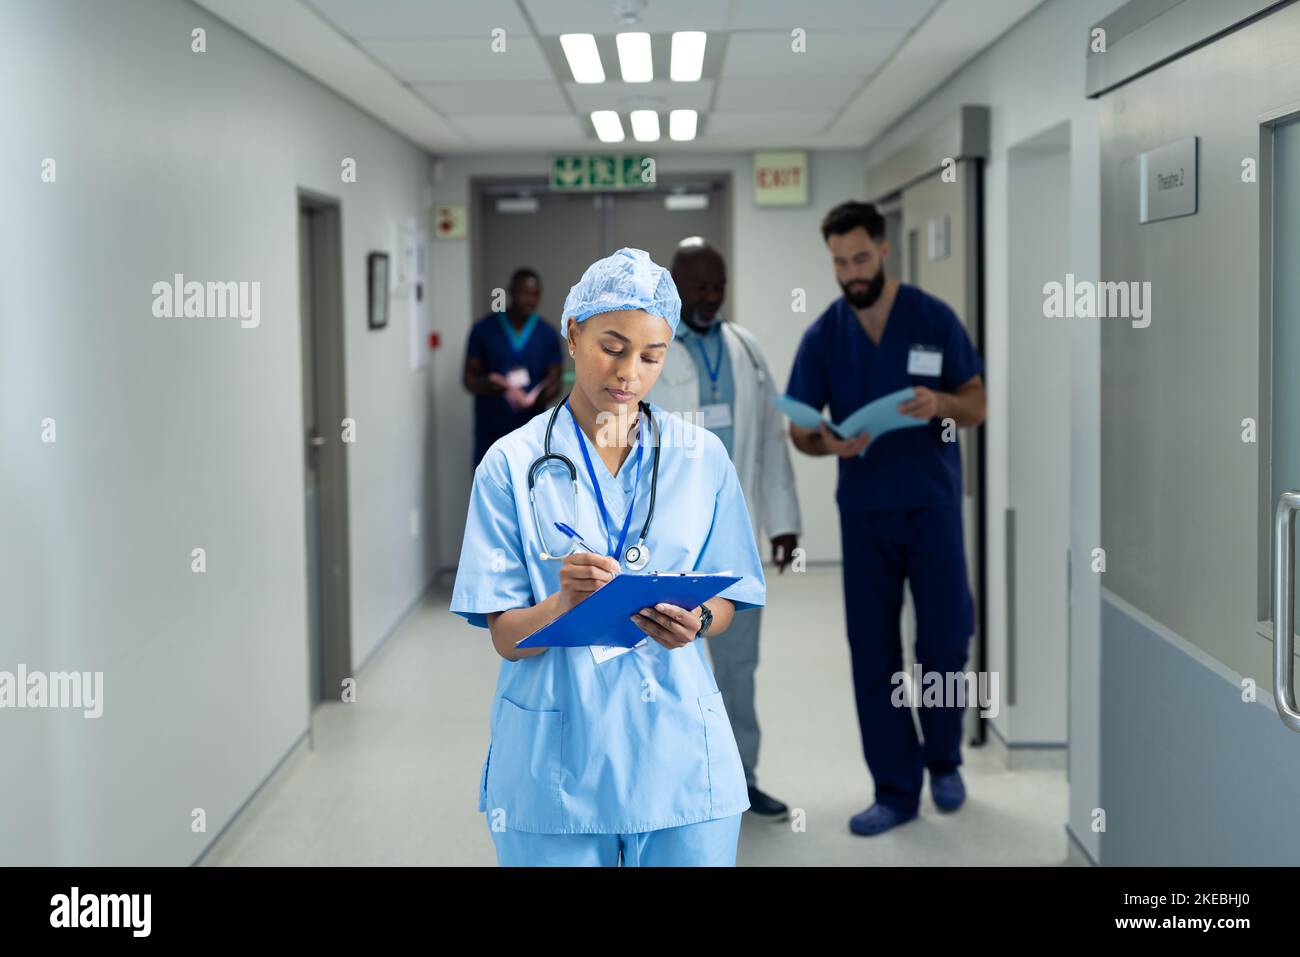 Biracial female doctor writing notes in busy hospital corridor, copy space. Hospital, medical and healthcare services. Stock Photo